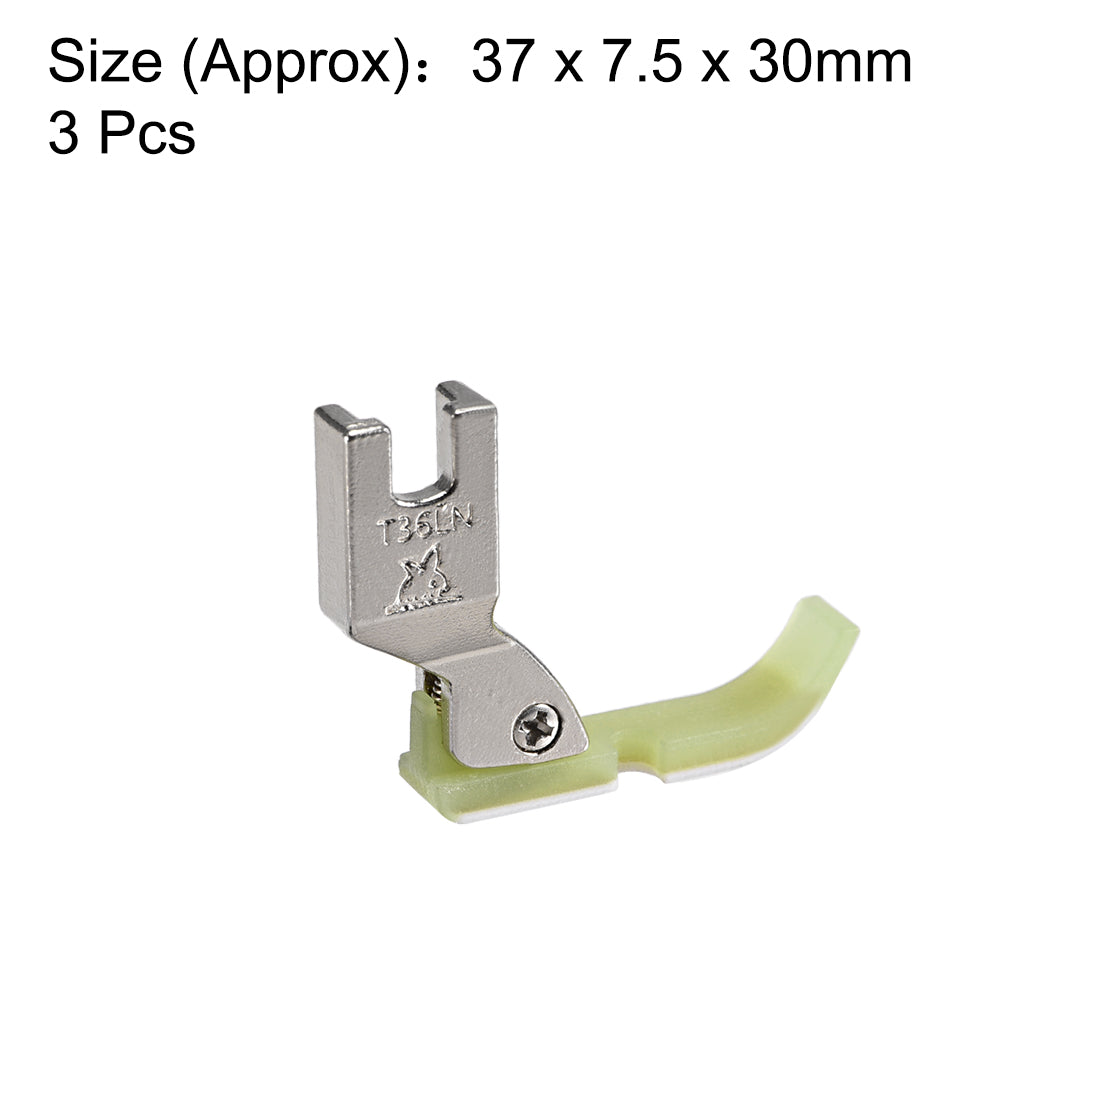 uxcell Uxcell #T36LN Narrow Zipper Foot with Plastic Bottom Suitable for Most of Industrial Sewing Machines 3pcs